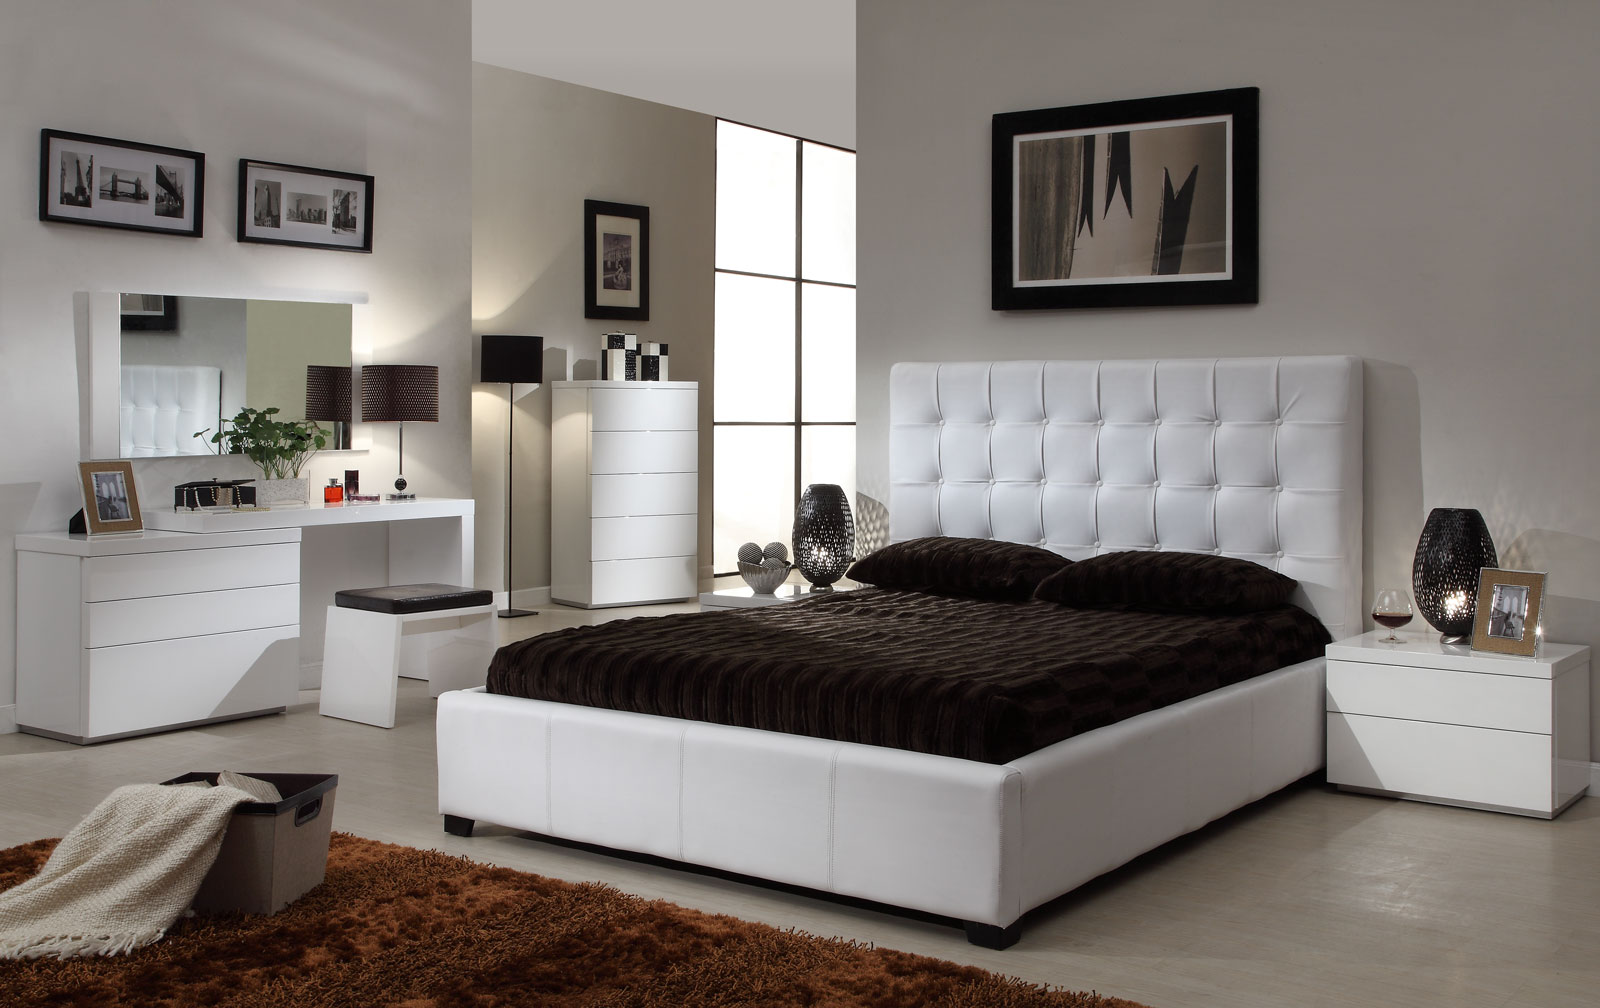 White Color In Adorable White Color Room Ideas In Bedroom With Tufted Headboard Of Queen Bedroom Sets Matched With Black Pillows Also Cover Bed And Furnished With Double Night Lamps Bedroom Queen Bedroom Sets For The Modern Style